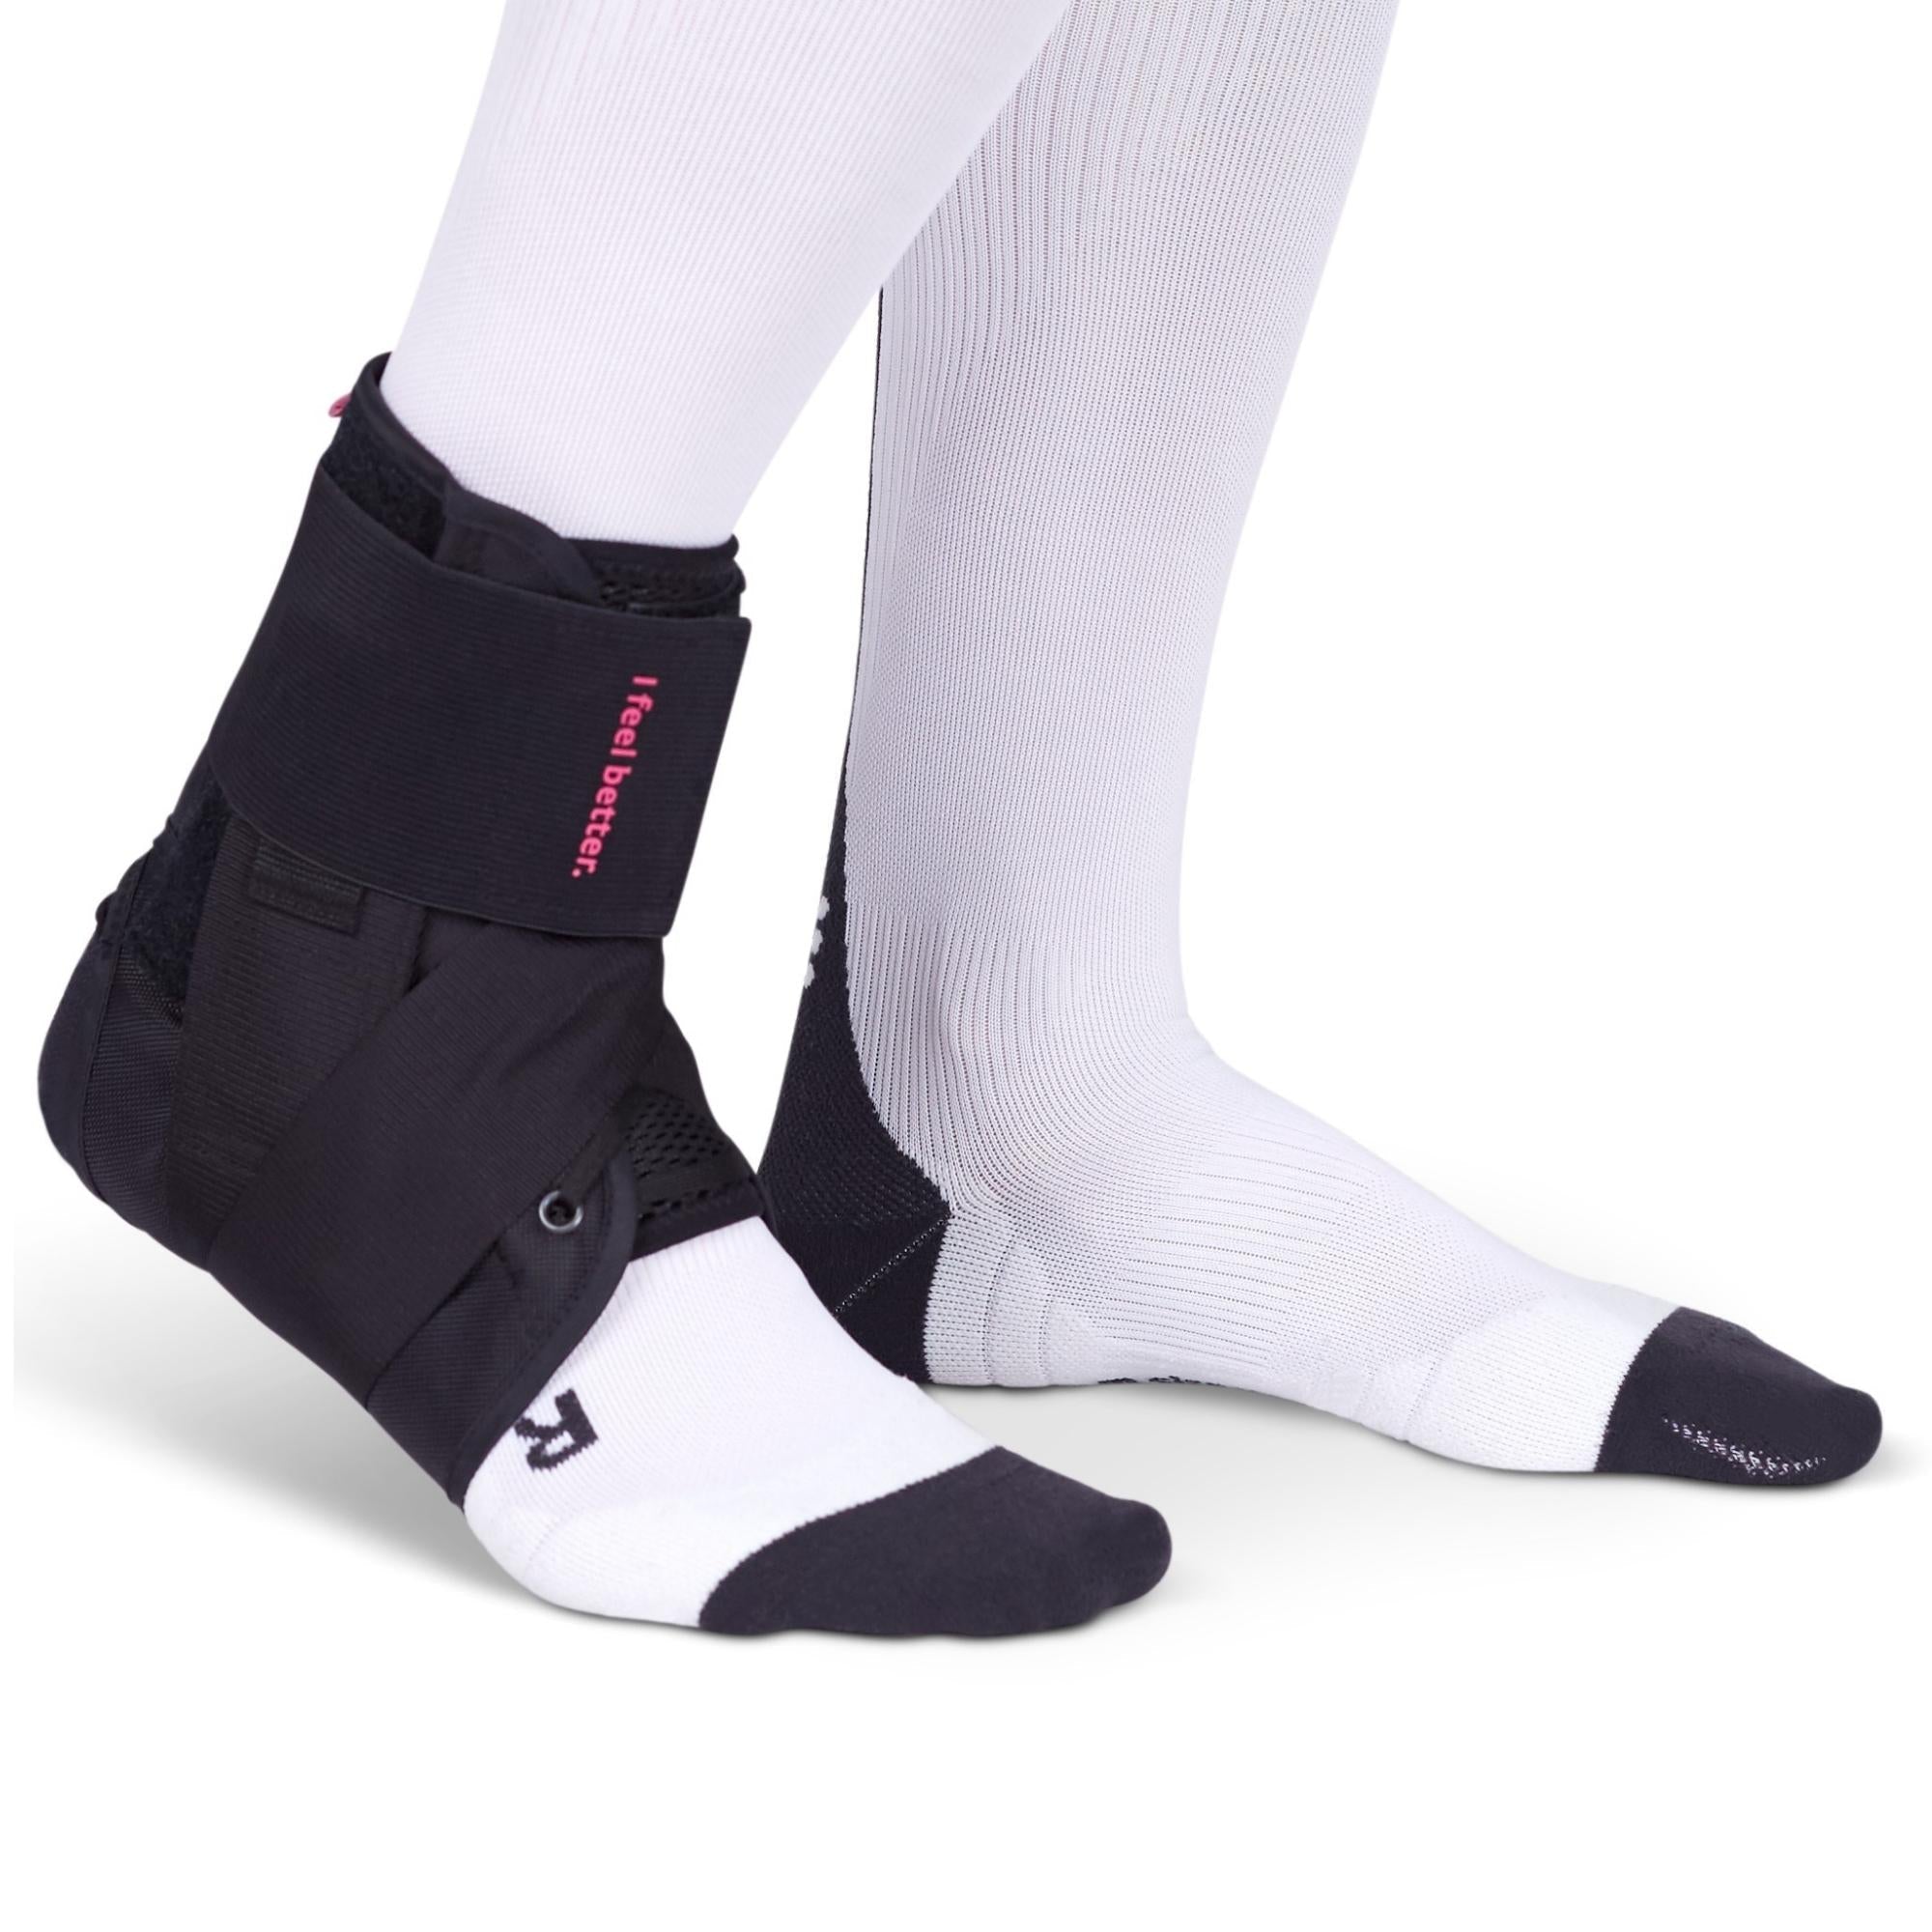 medi protect Swift Lace Ankle Support